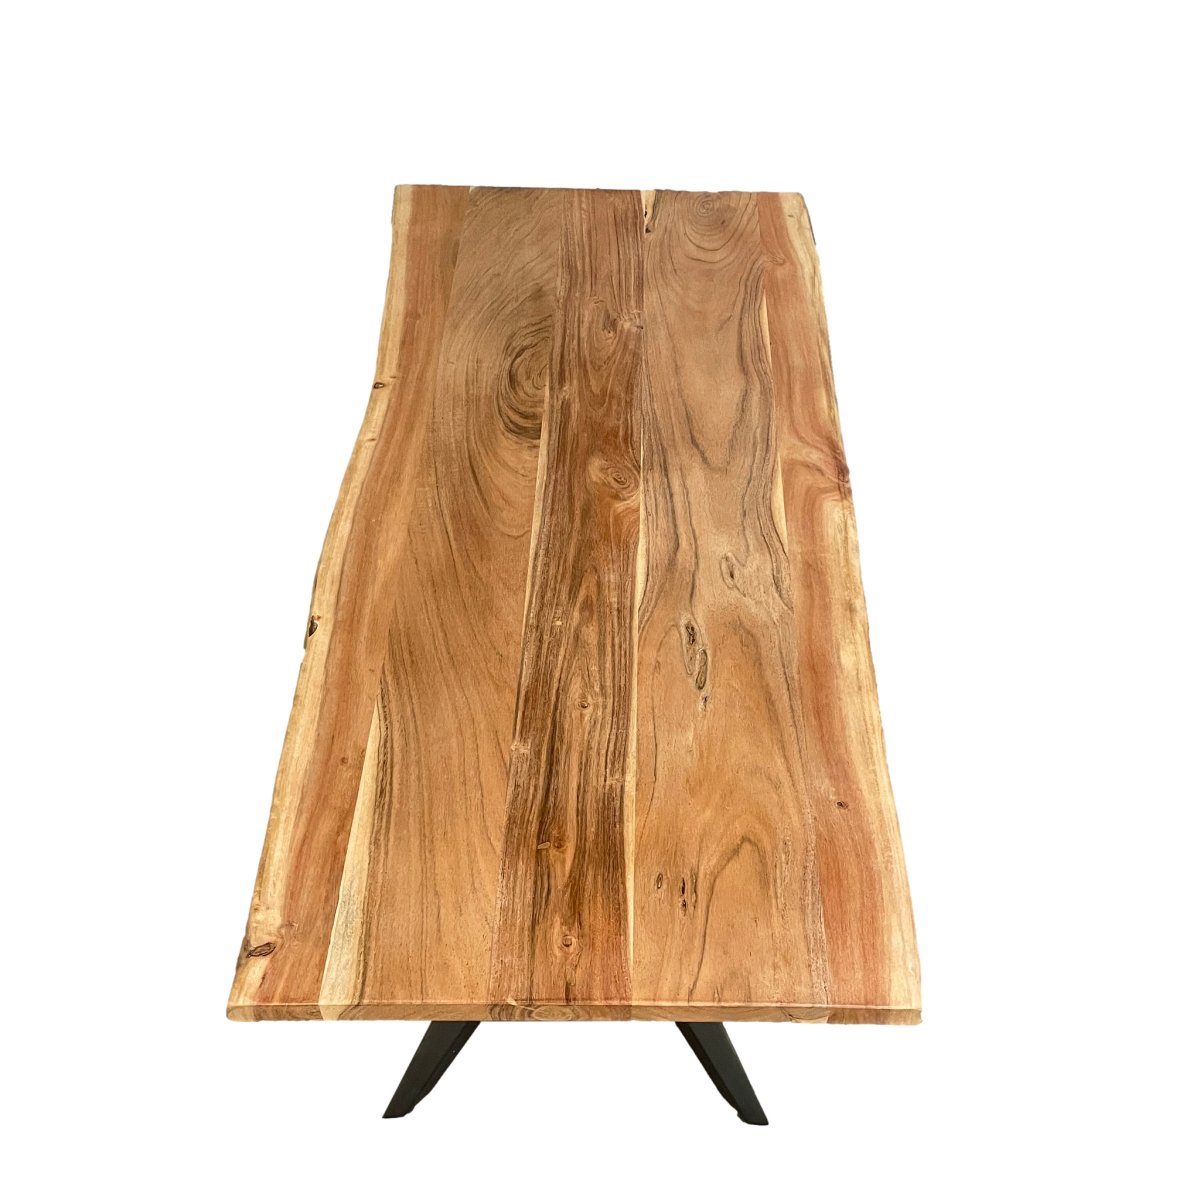 Acacia Wood Coffee Table Spider legs - Rustic Furniture Outlet